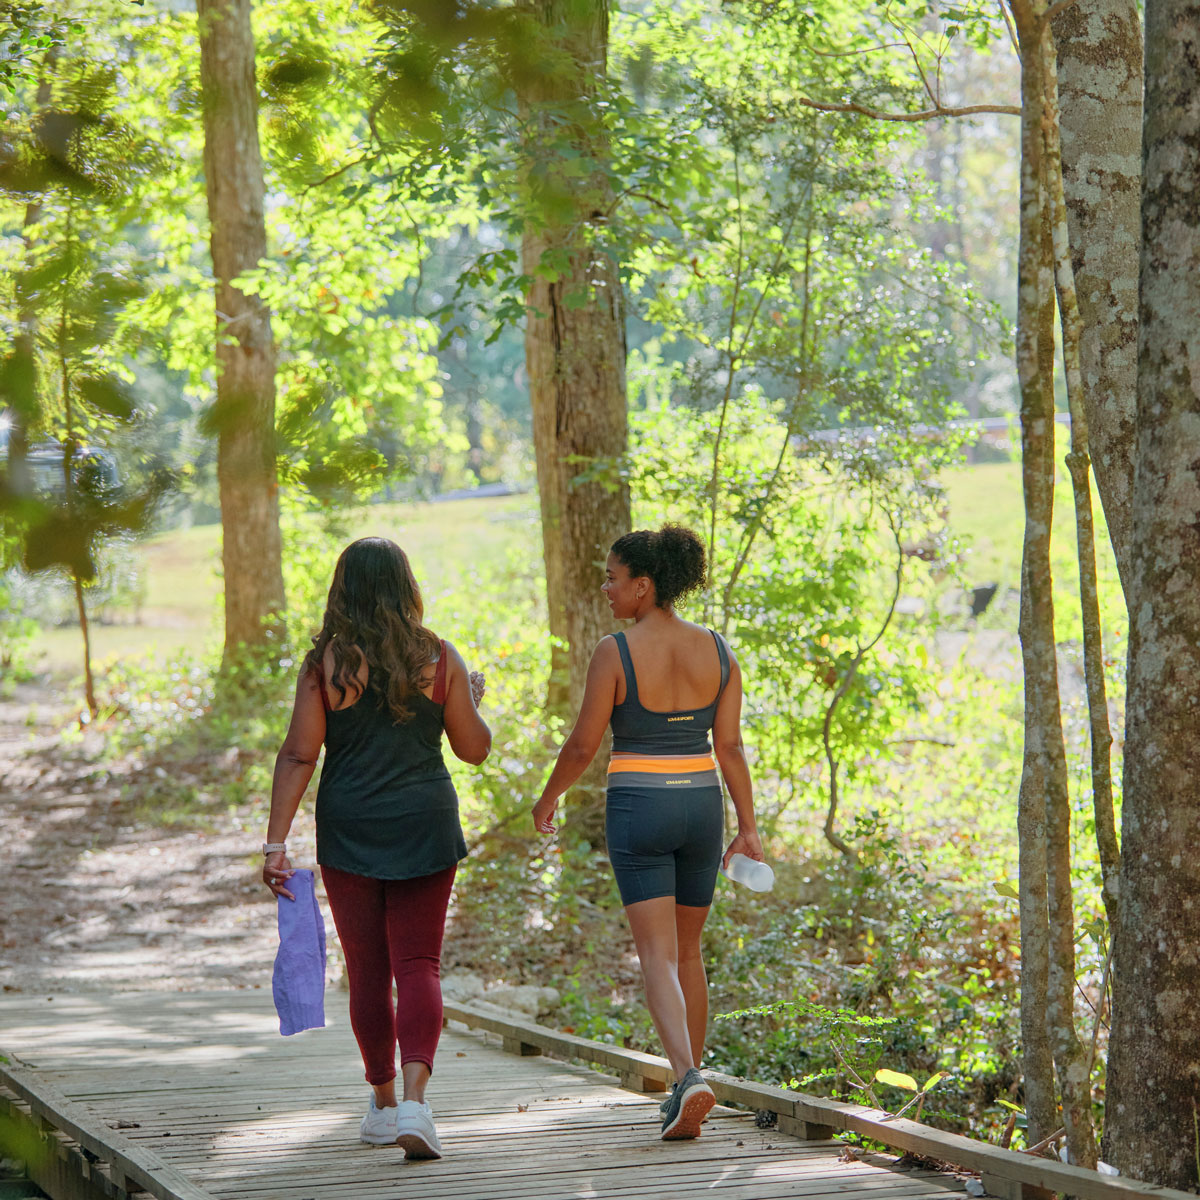 Happy Earth Day! 🌎 Today, as we celebrate Earth Day, let's take a moment to reflect on the beauty and importance of our planet, especially in our own backyard here in The Woodlands Hills. 🌳 From the towering trees to the babbling brooks, our com... #EarthDay #TheWoodlandsHills